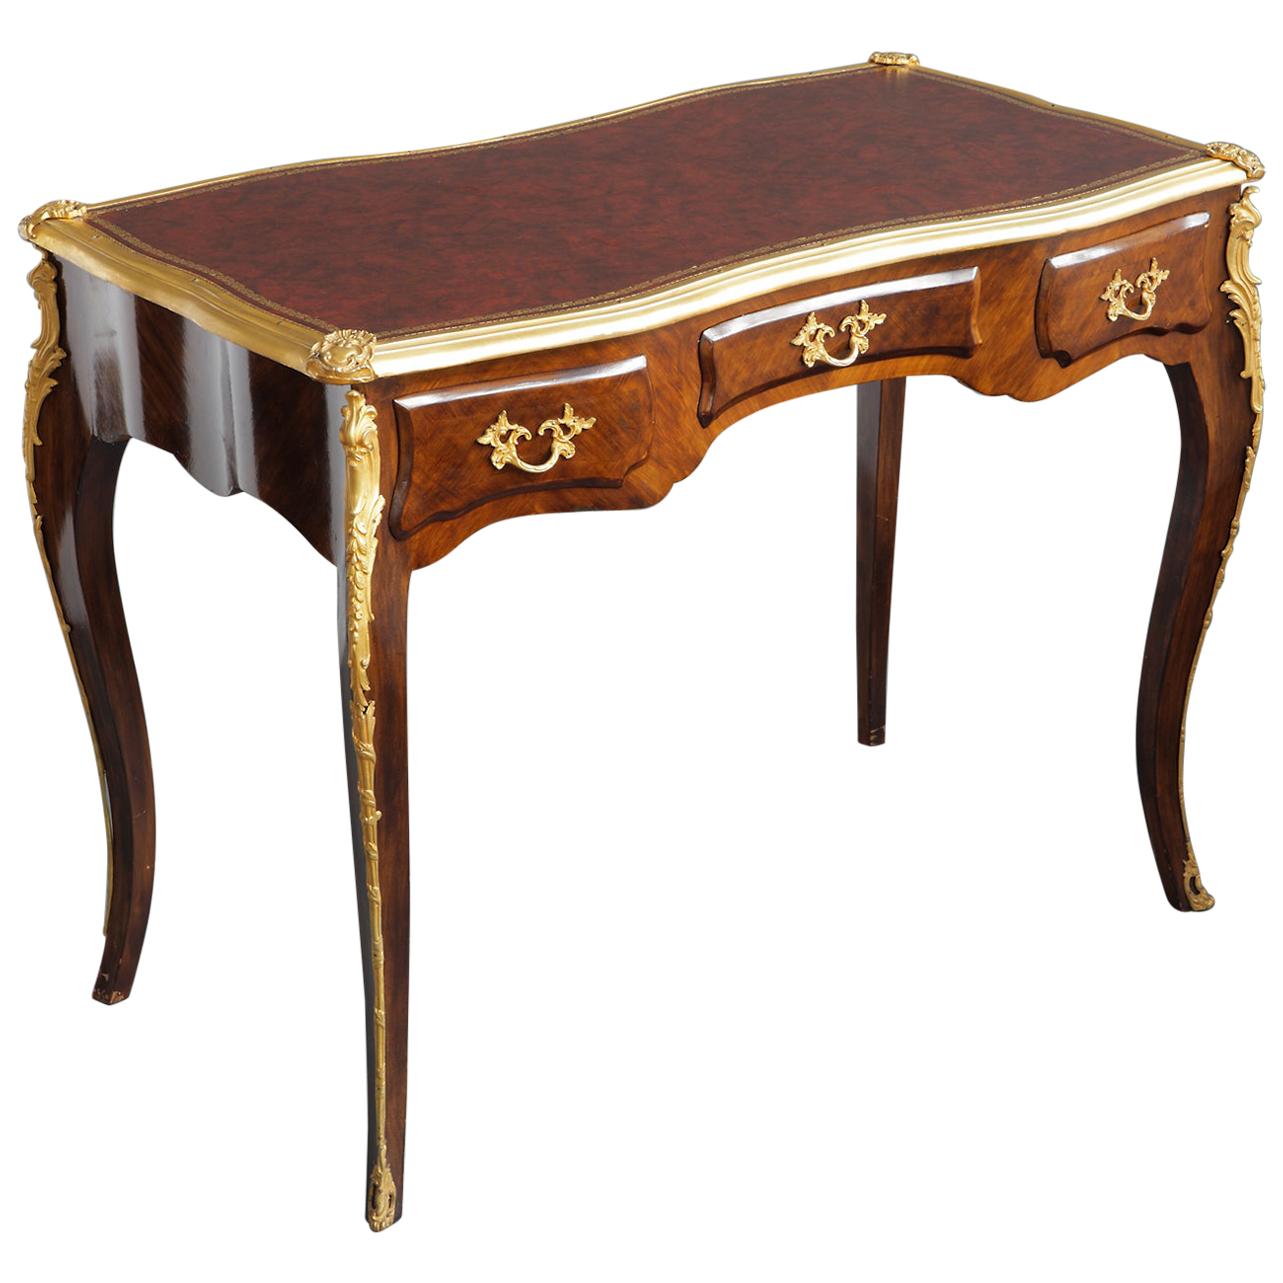 Antique French Gilt Bronze-Mounted table / Desk